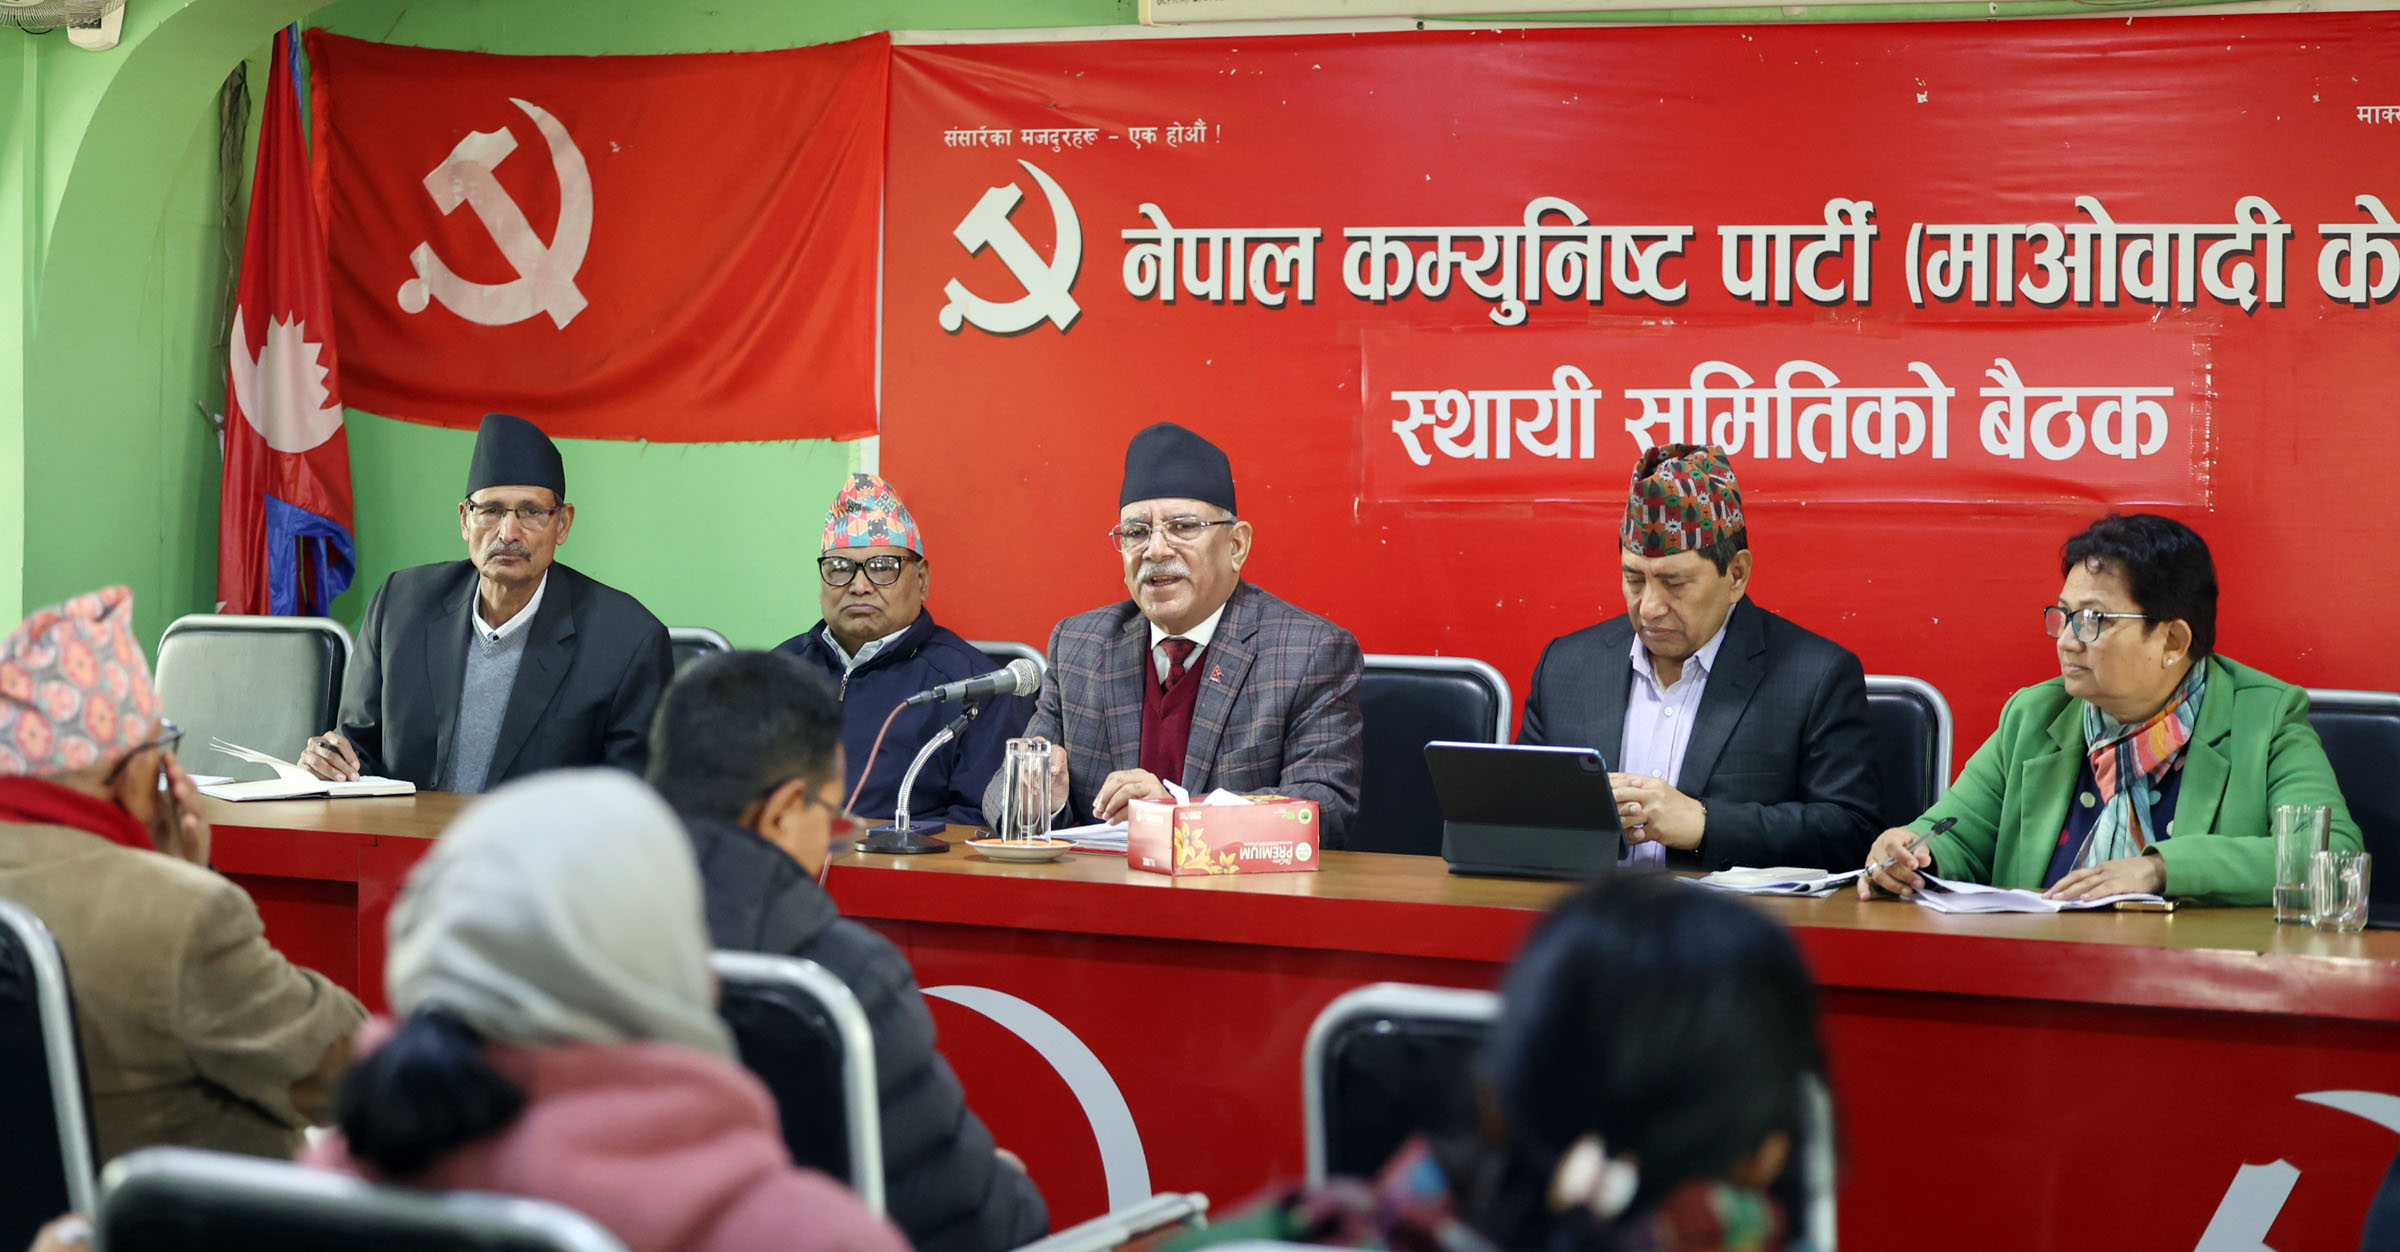 Maoists’ decision: To contest NA Chairmanship, contest election alone